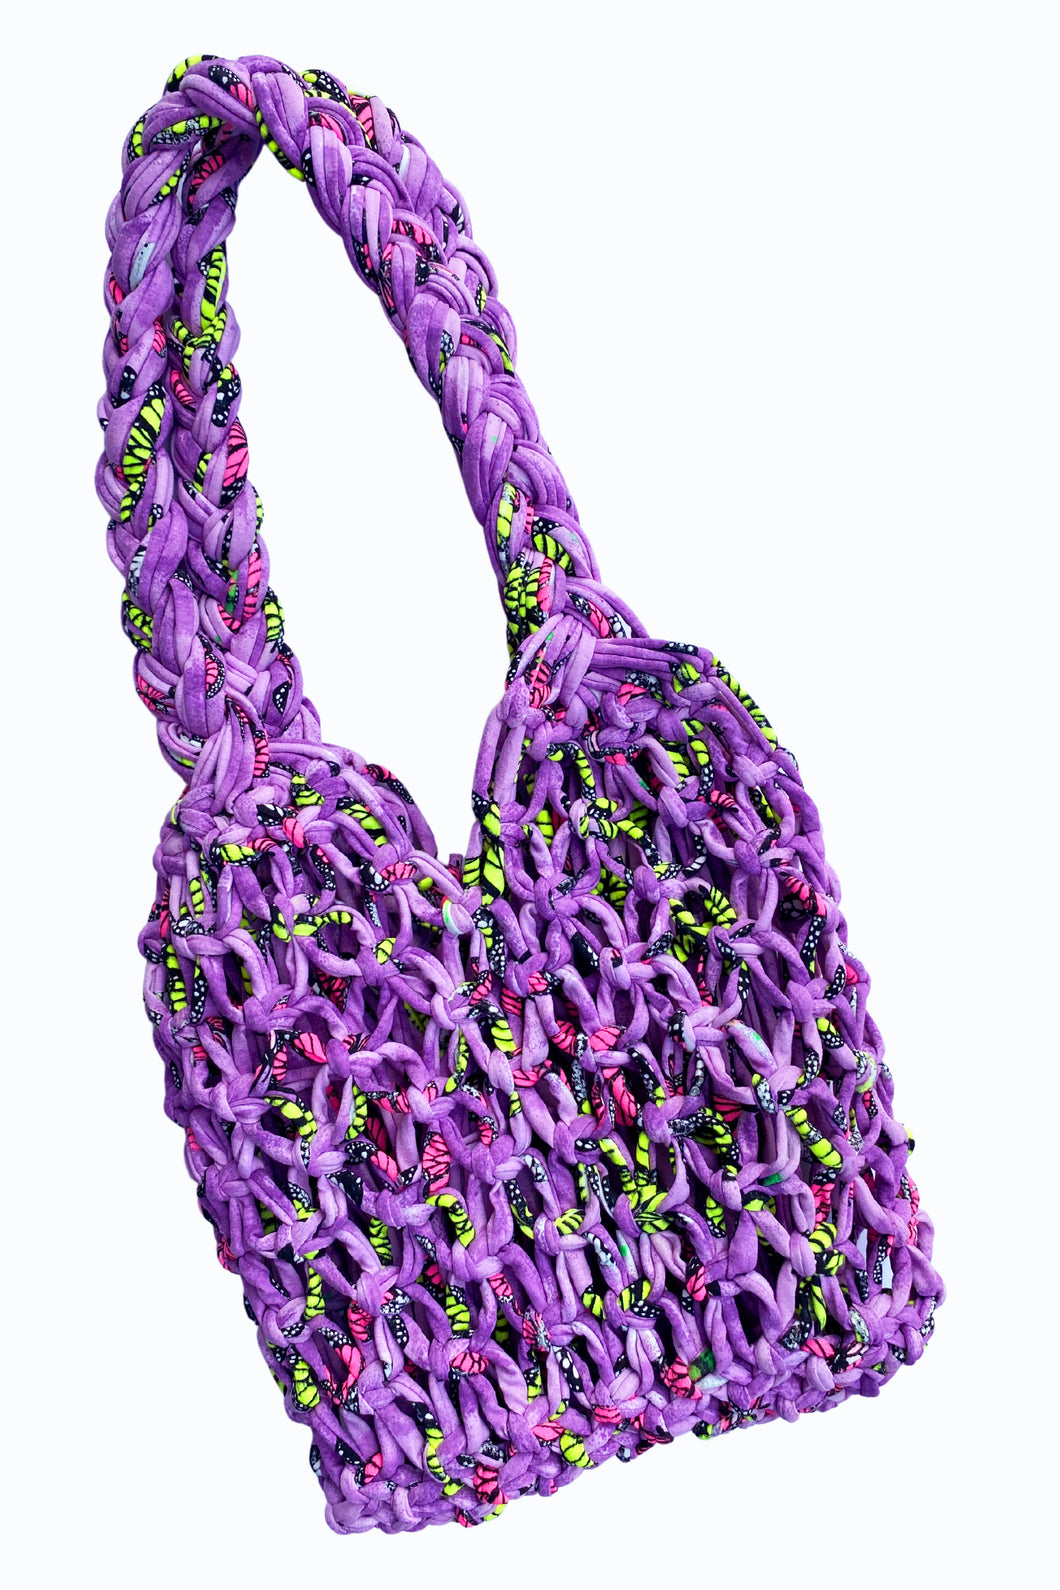 Neon Butterfly Macrame Bag - Medium with Long Straps